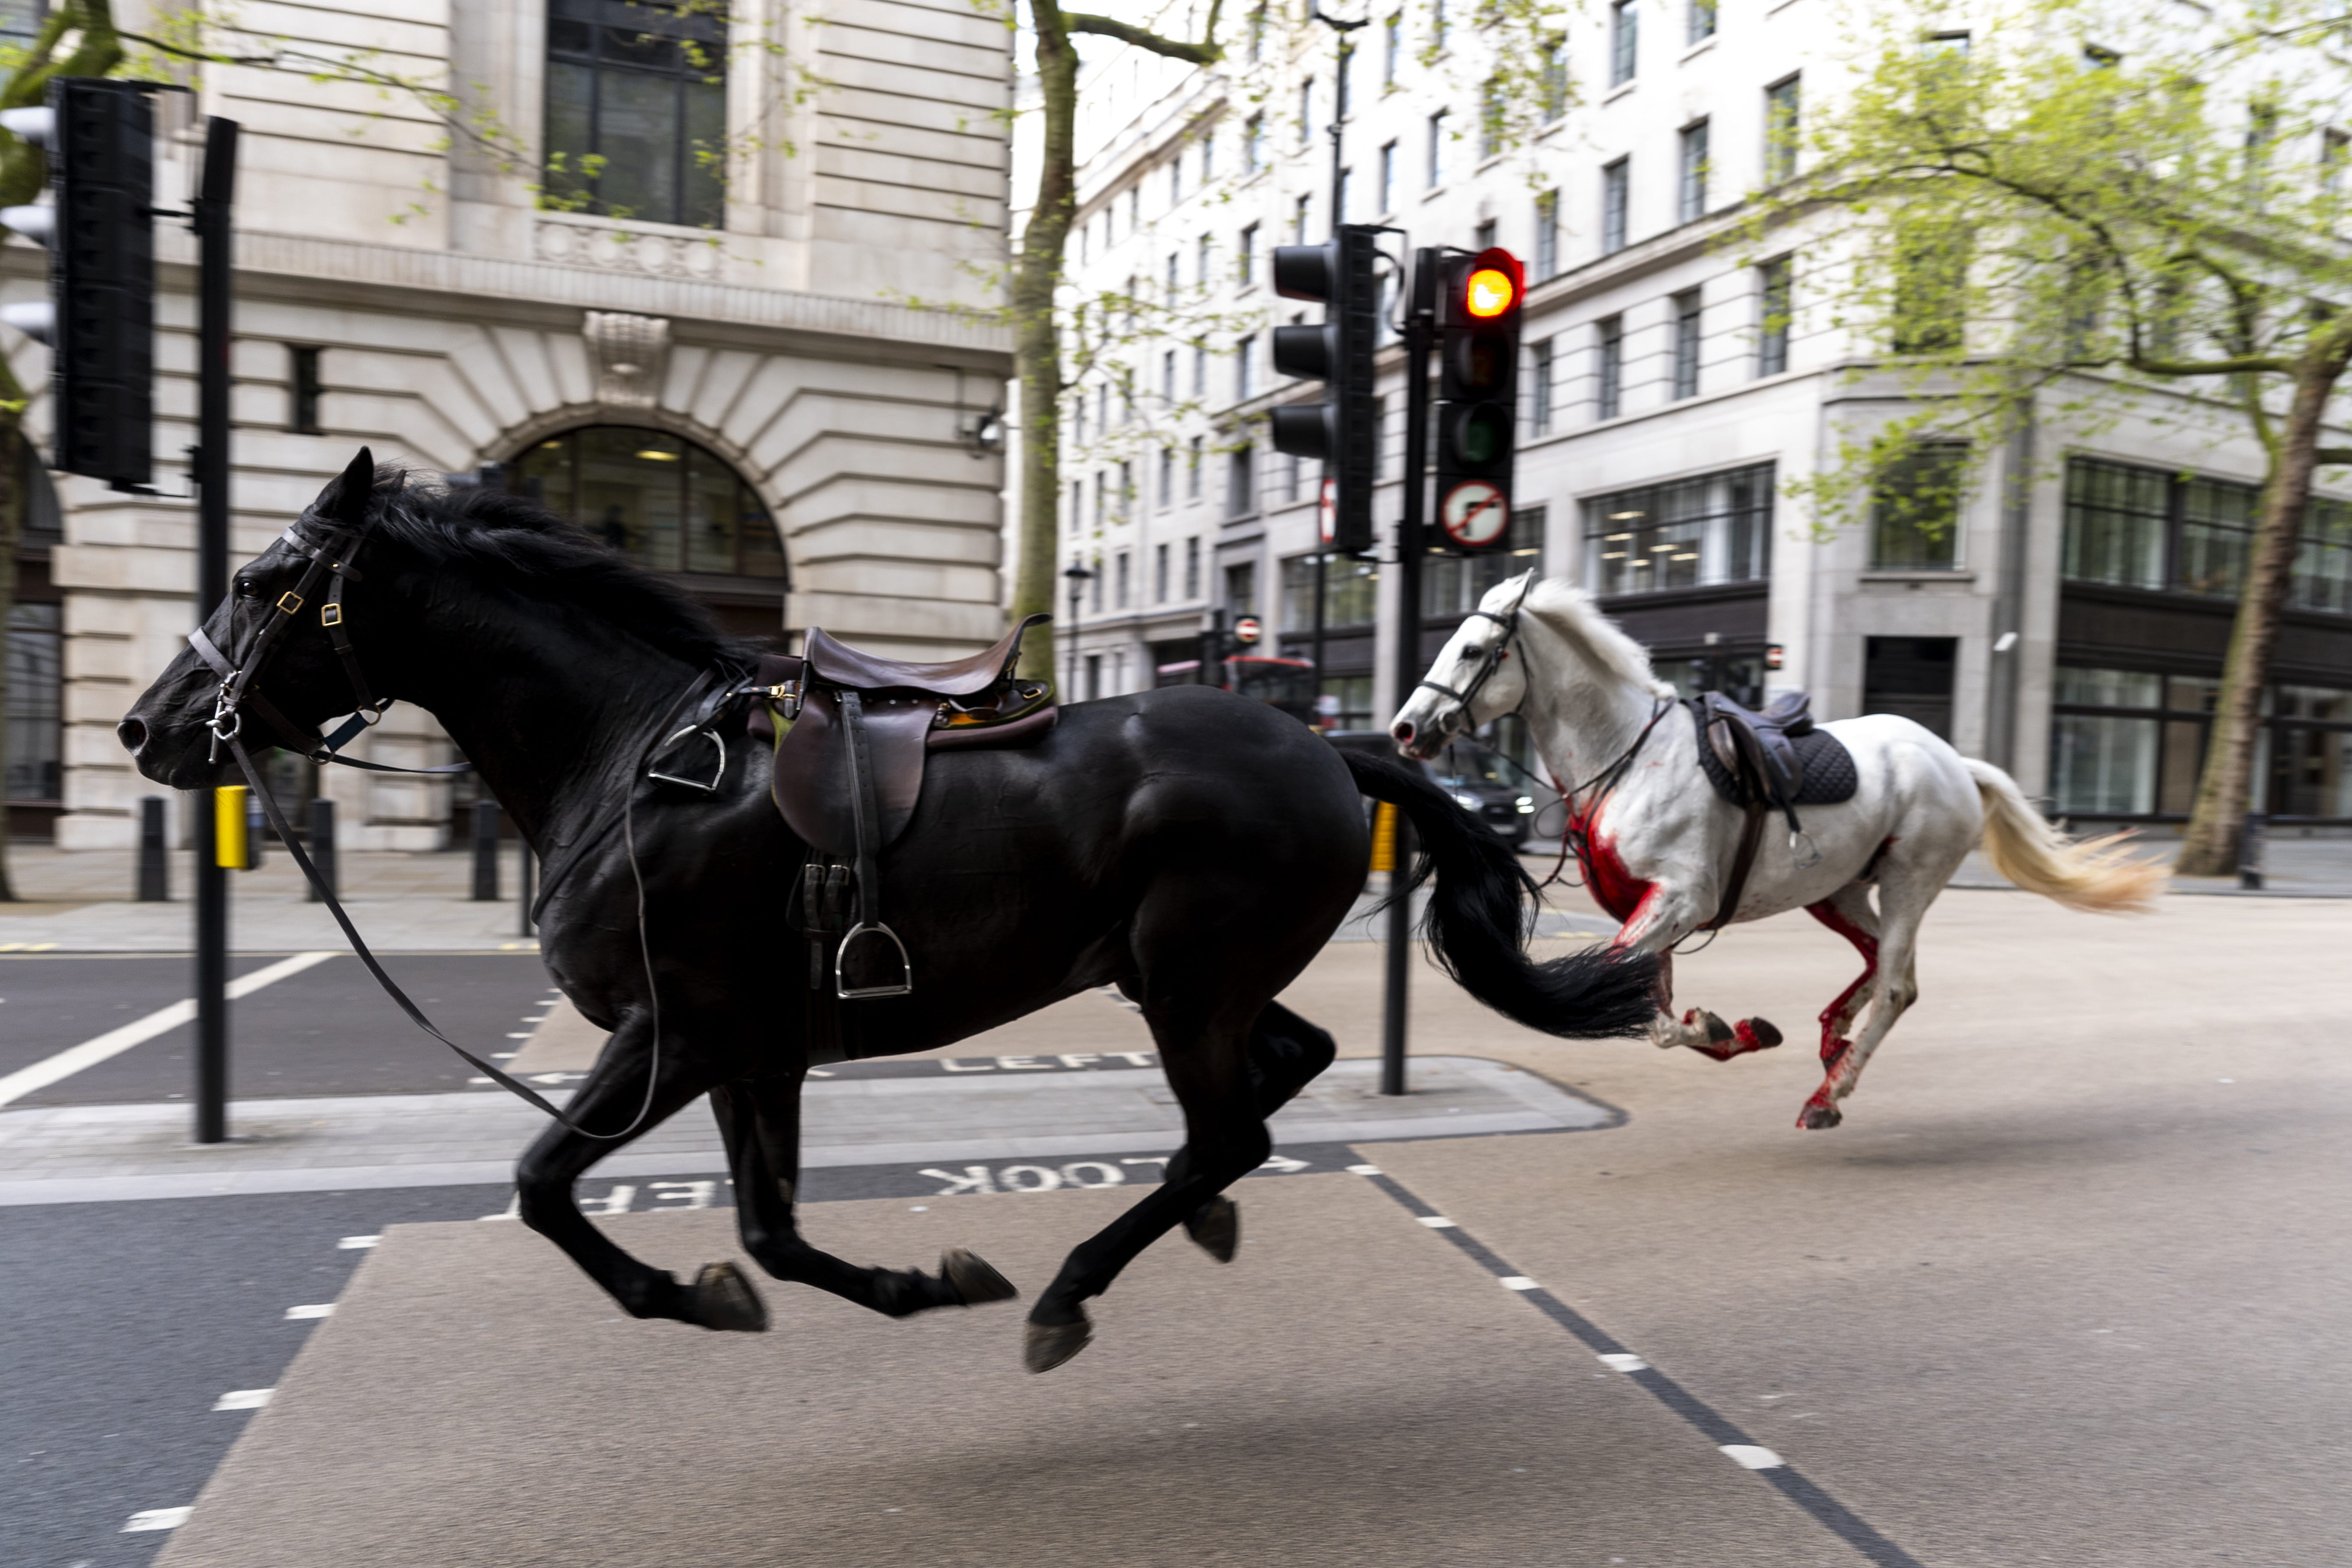 One of the horses was covered in blood as two of the animals galloped in the road near Aldwych, London